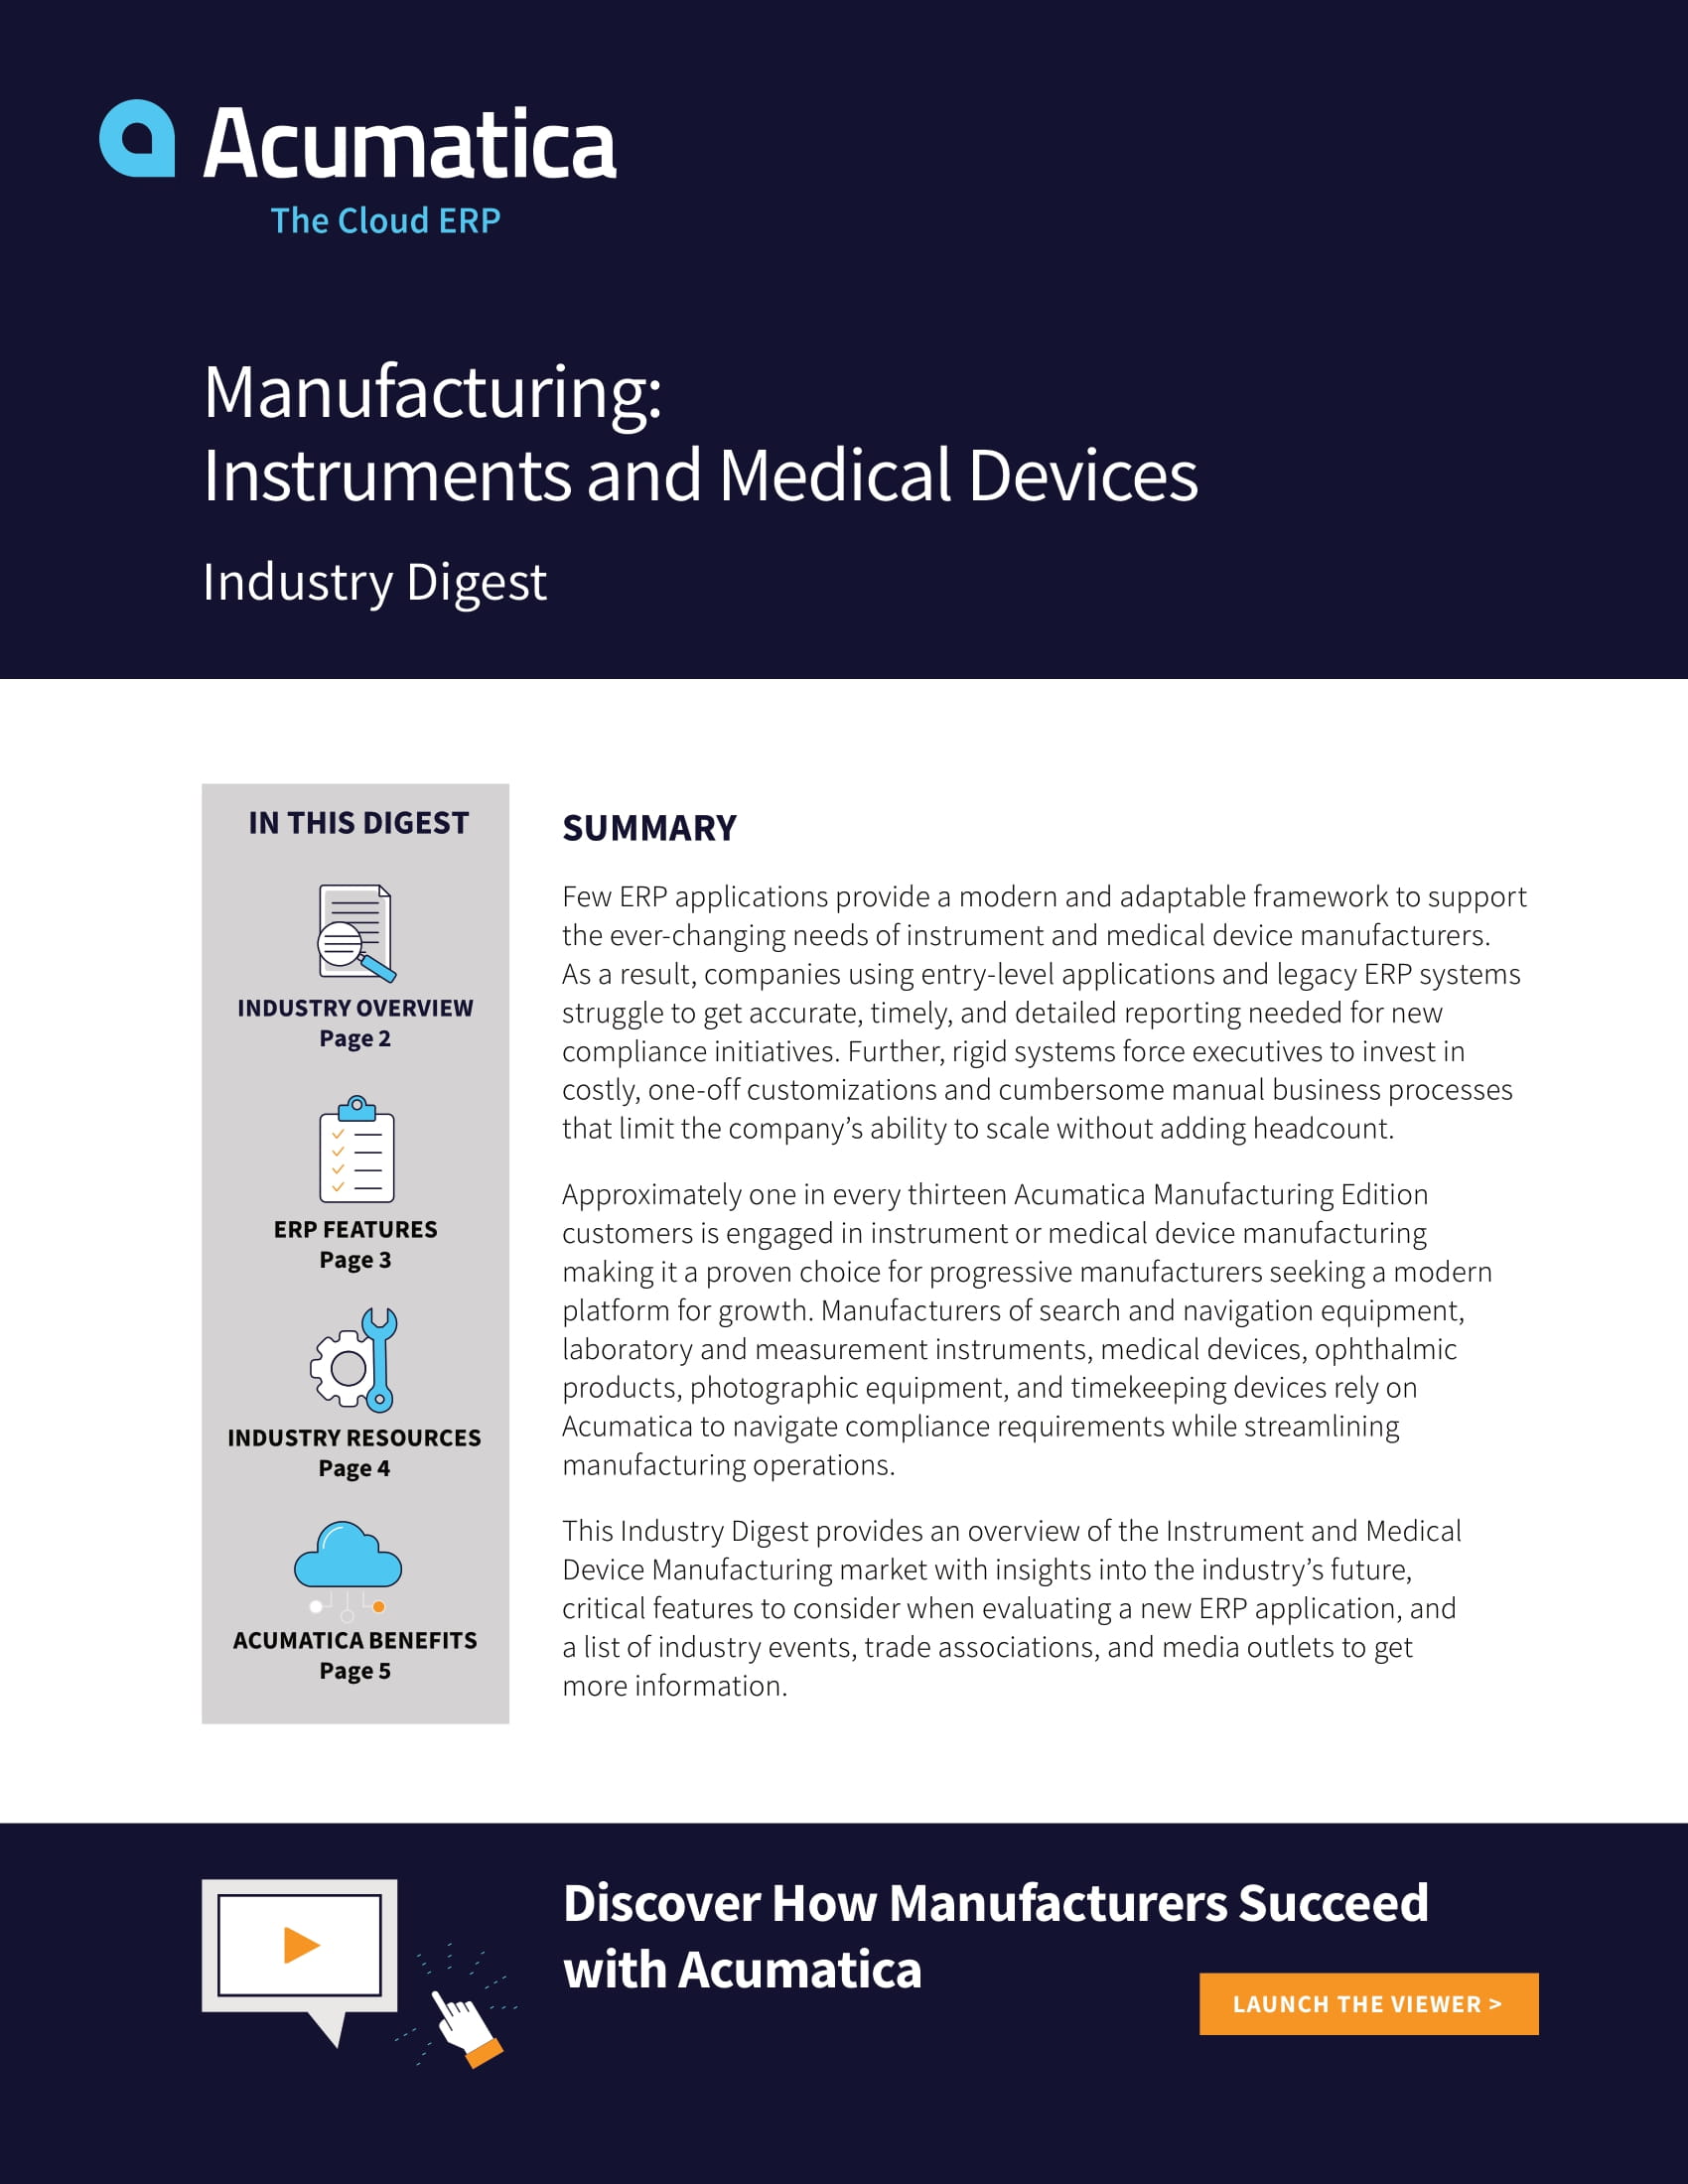 Why Instrument And Medical Device Manufacturers Need A Modern ERP Solution